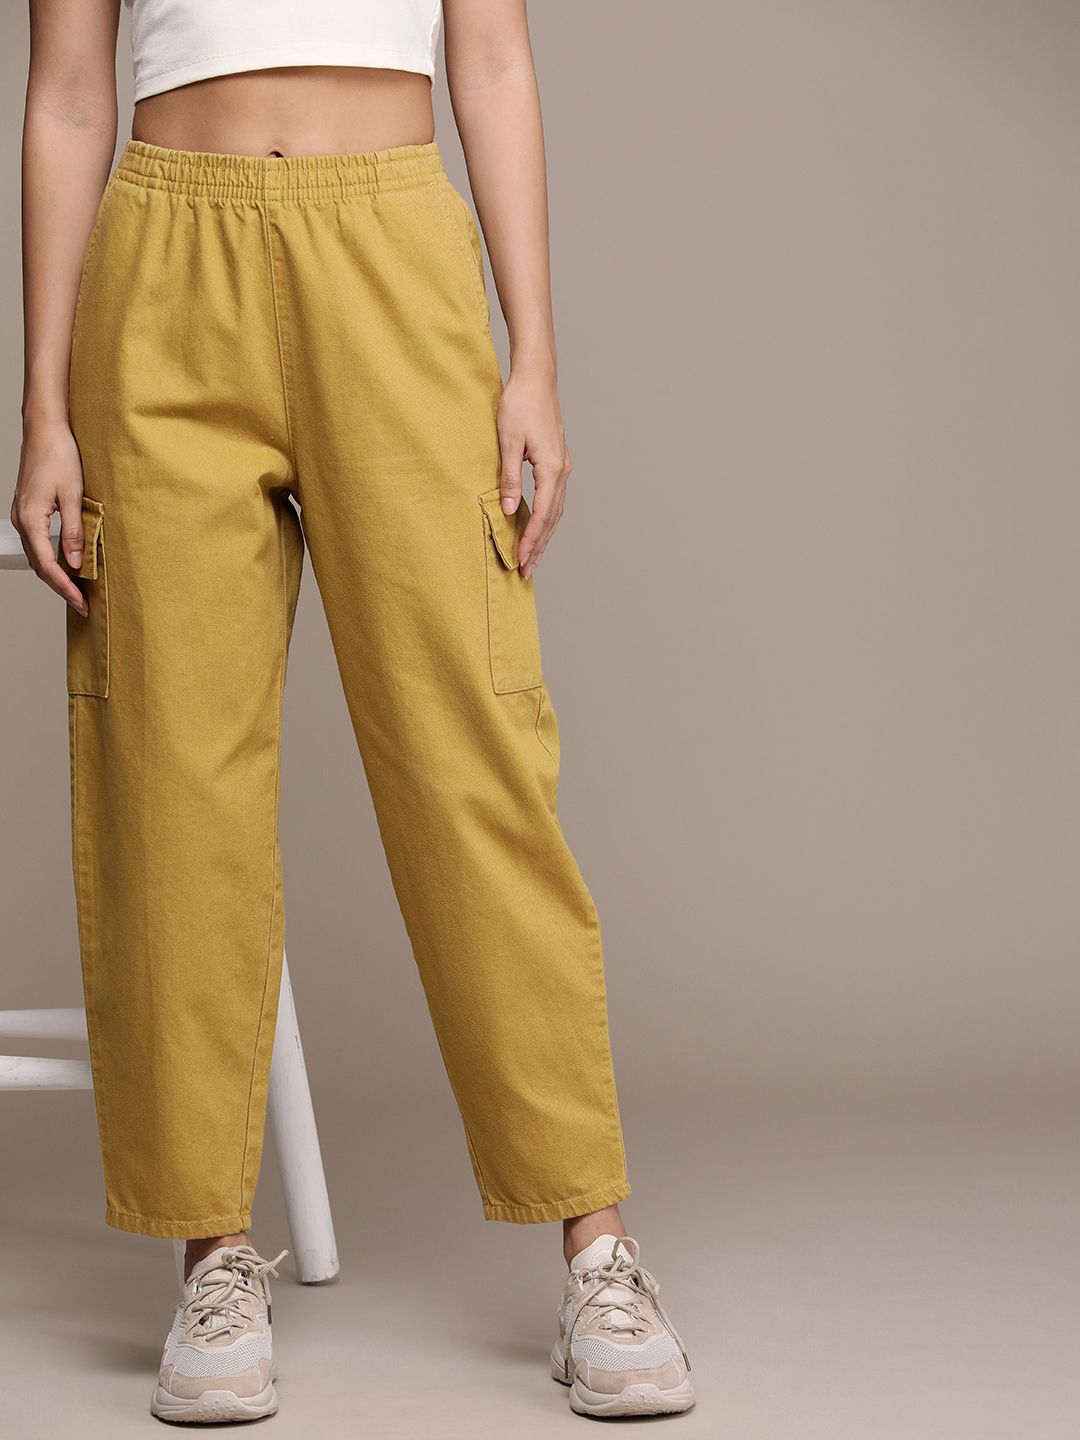 The Roadster Lifestyle Co. Women Pure Cotton Cargos Trousers Price in India